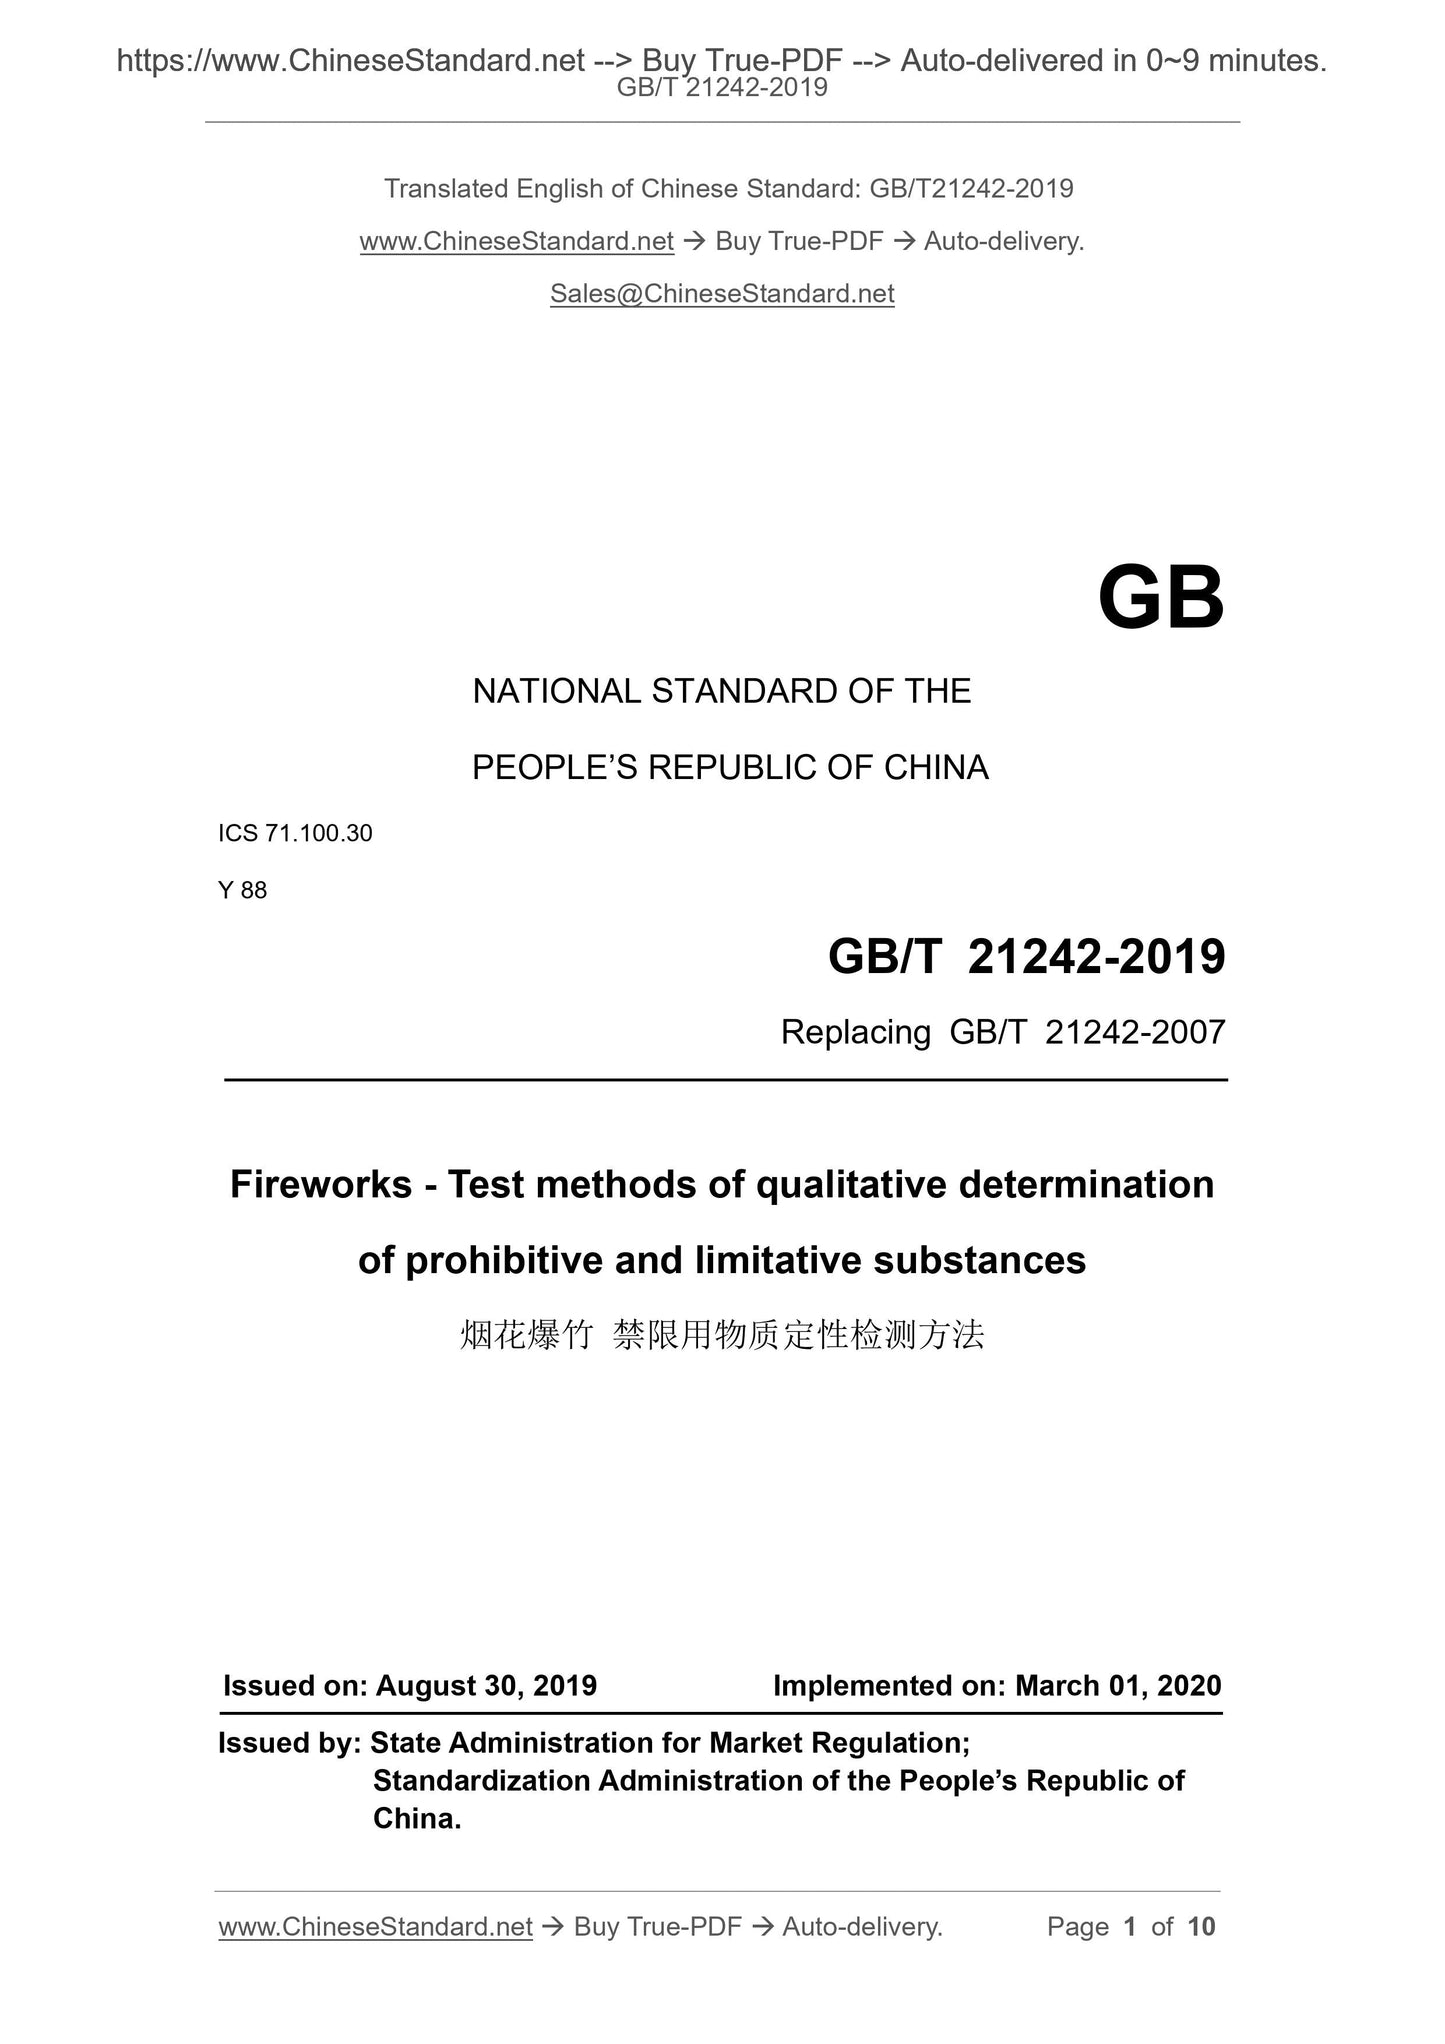 GB/T 21242-2019 Page 1